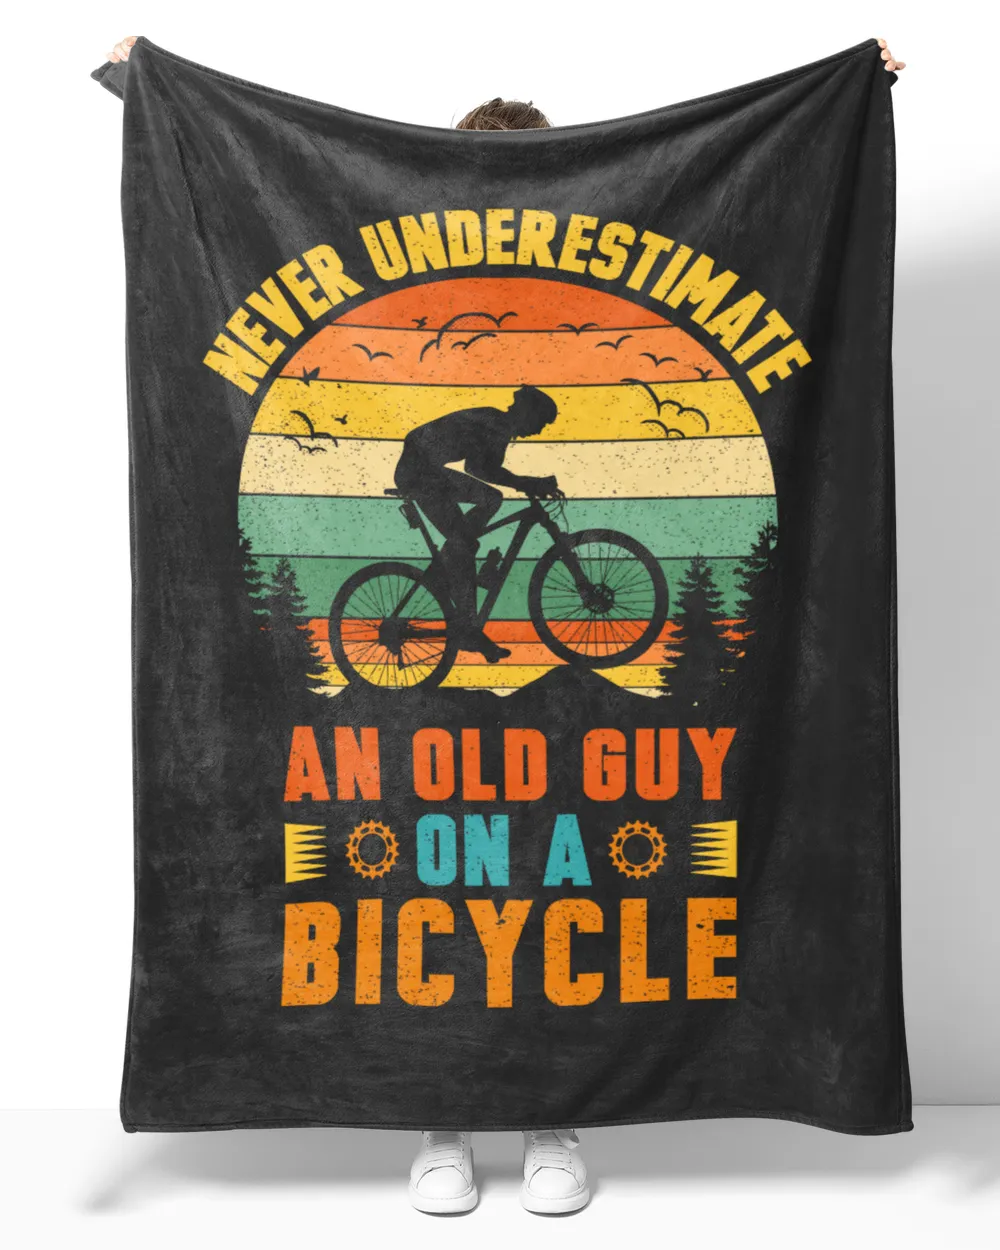 Never Underestimate an old guy on a bicycle